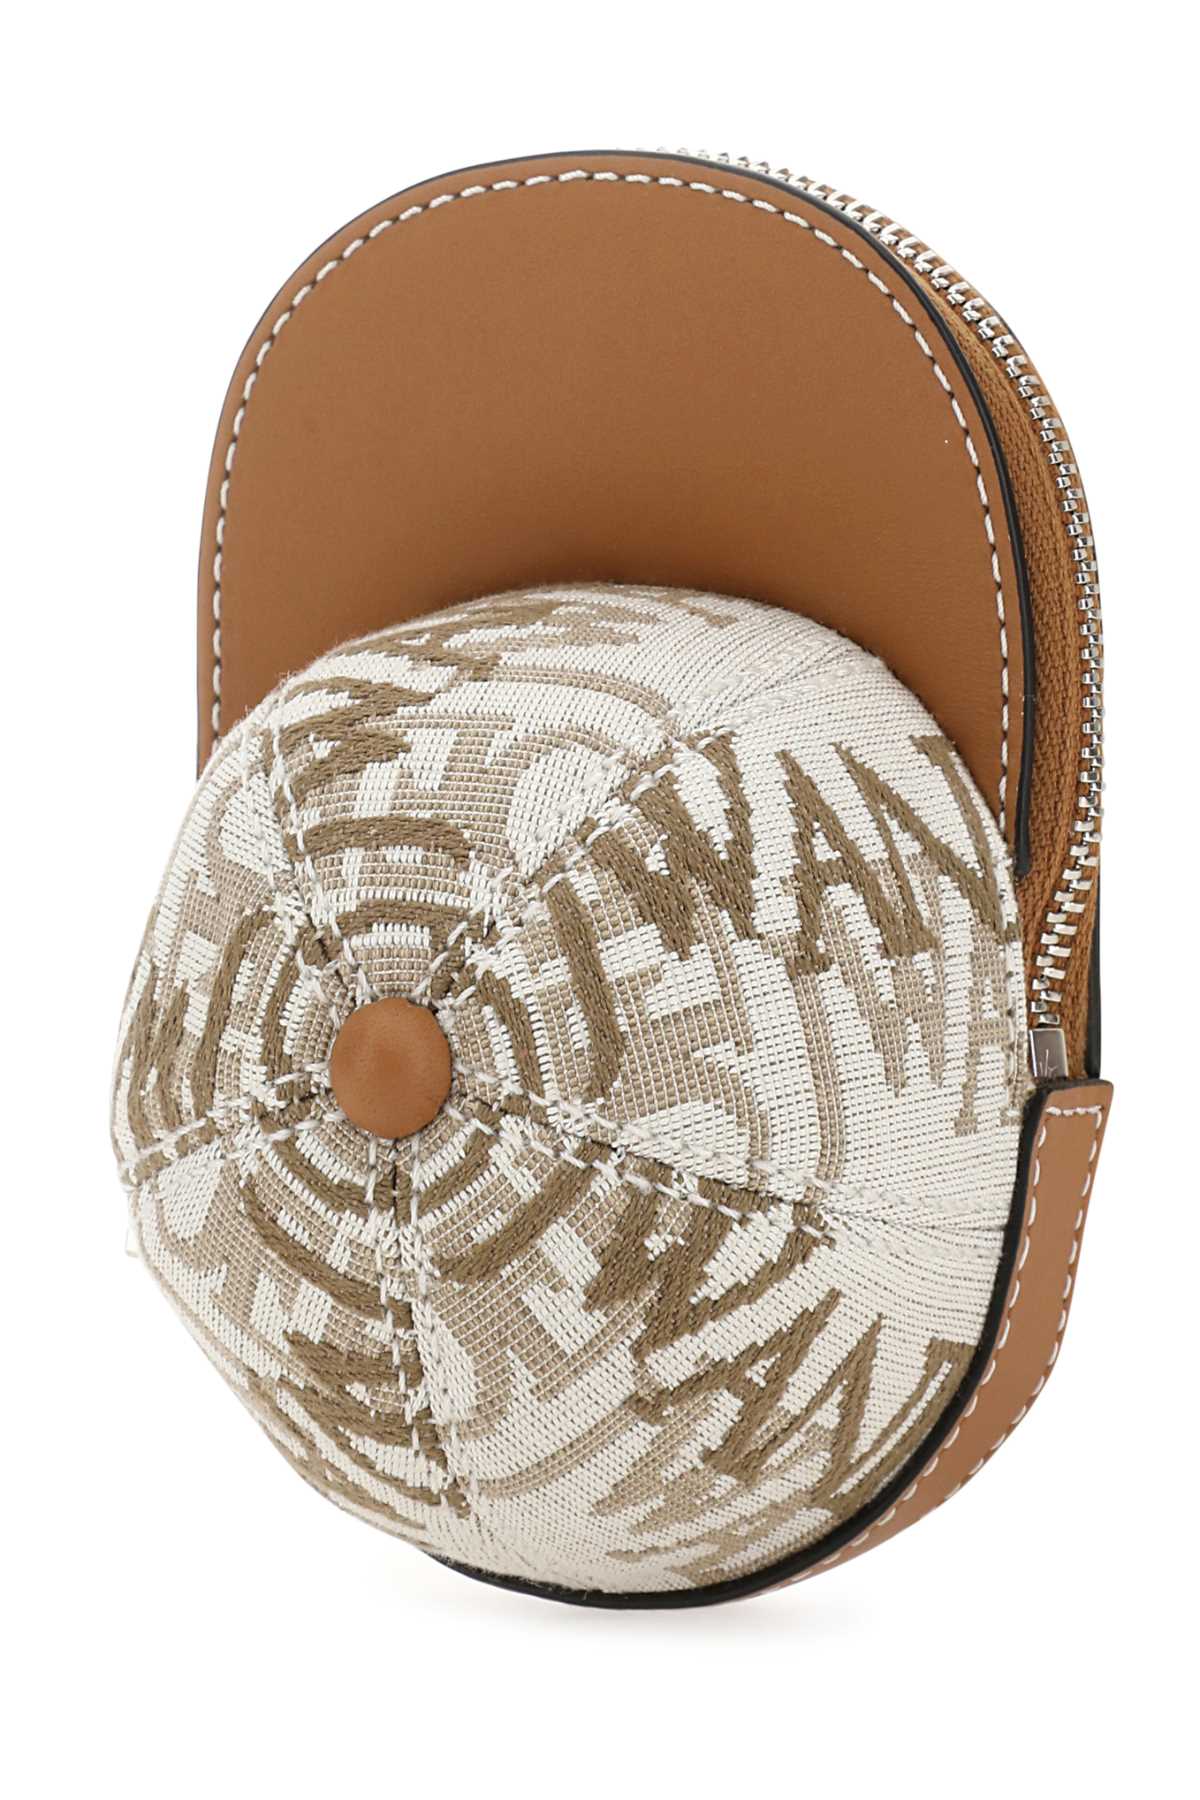 Jw Anderson Two-tone Canvas And Leather Nano Cap Crossbody Bag In Naturalpecan